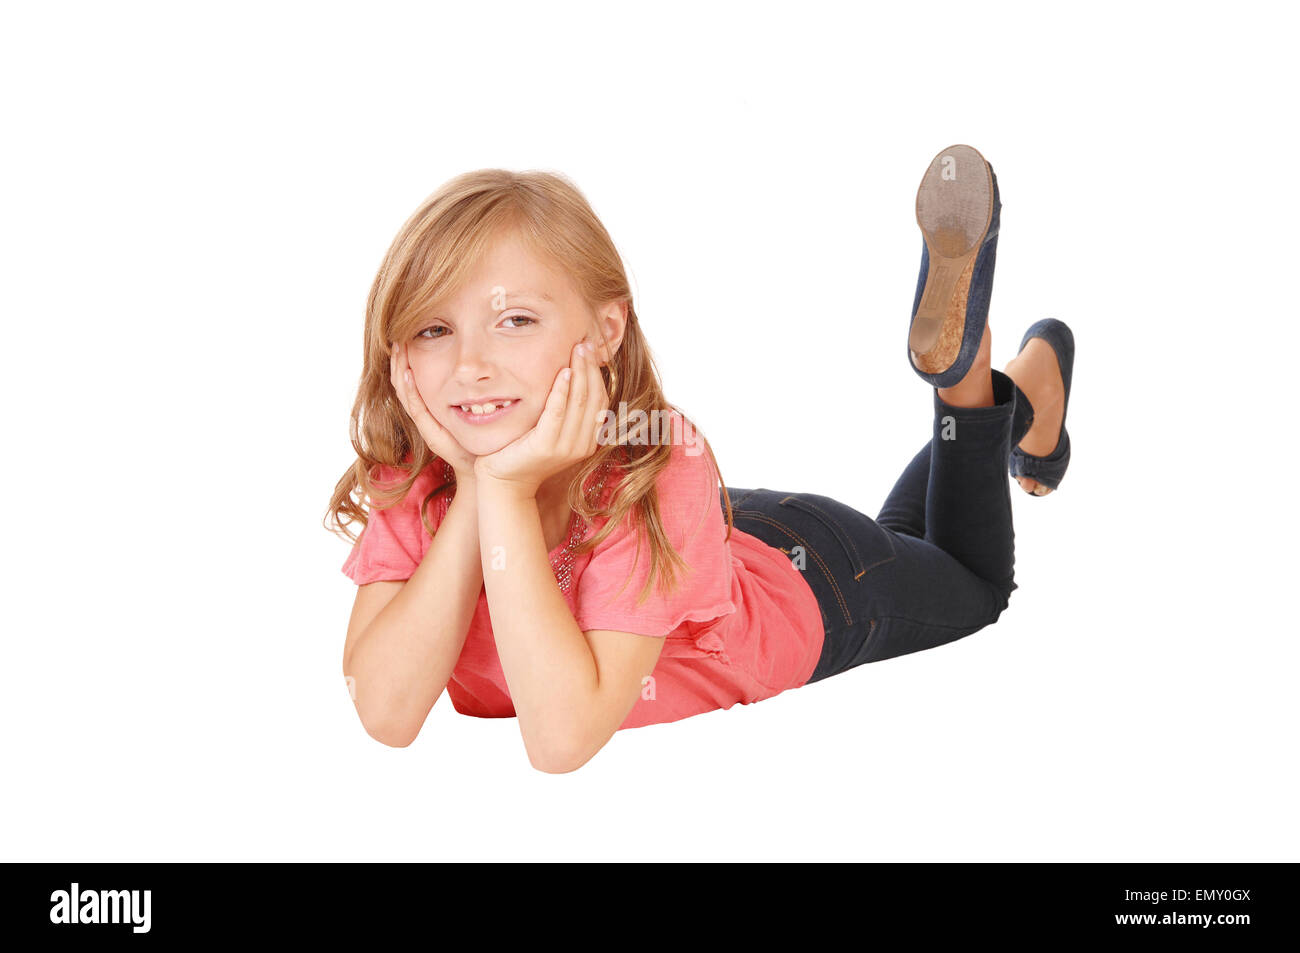 A blond little girl in a pink sweater lying on the floor on her stomach, smiling, isolated on white background. Stock Photo